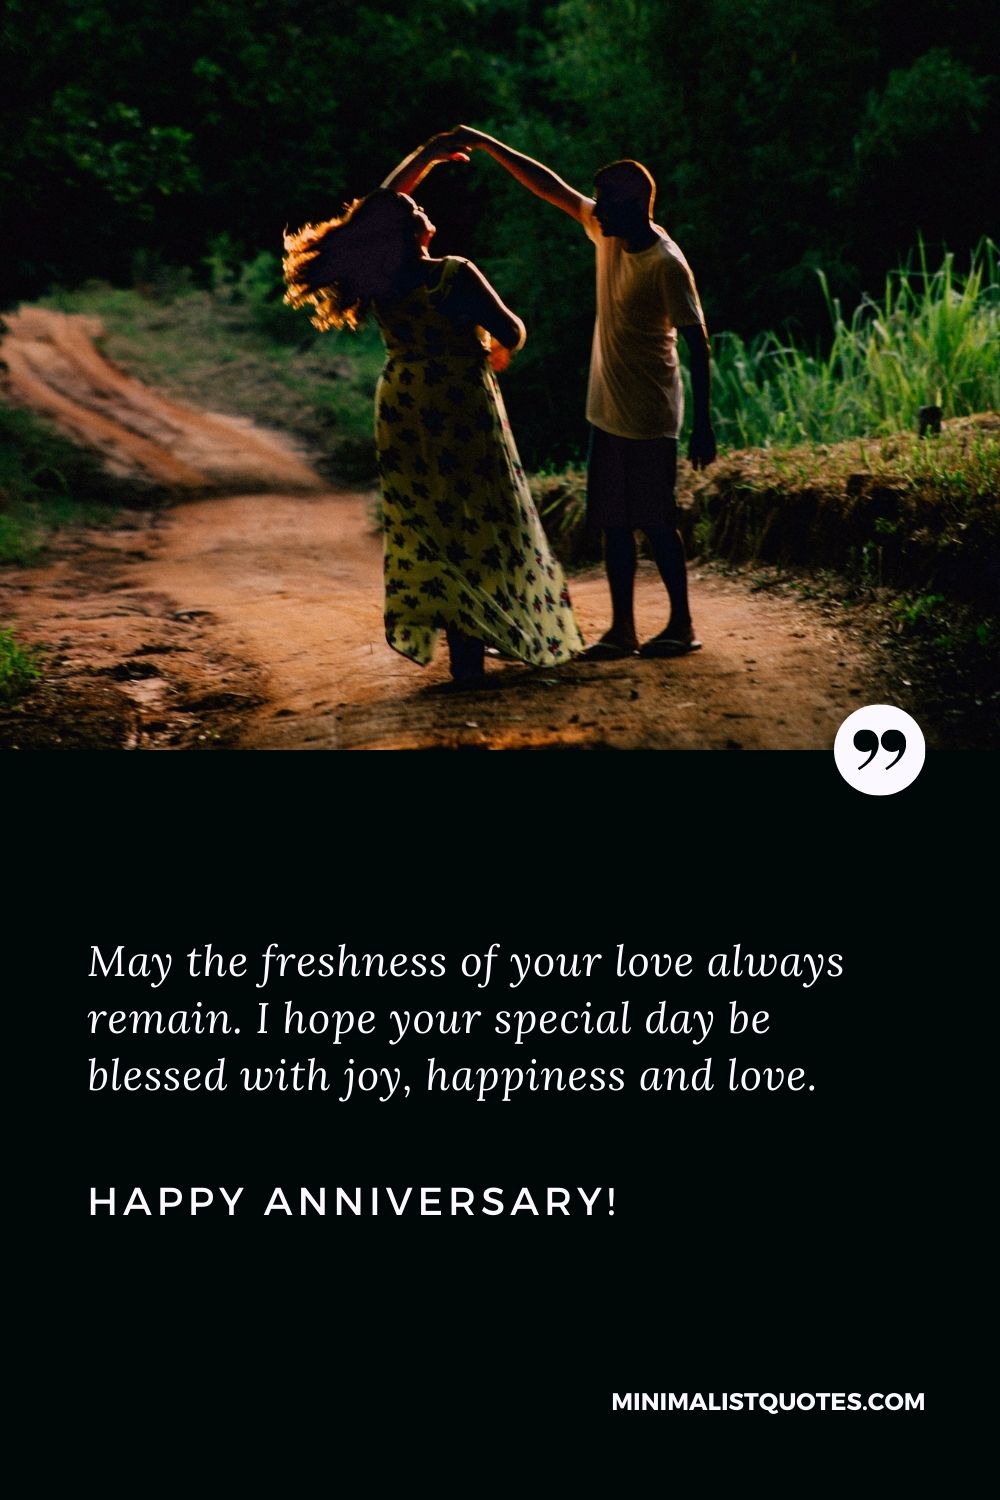 Happy anniversary quotes for friend: May the freshness of your love always remain. I hope your special day be blessed with joy, happiness and love. Happy Anniversary!